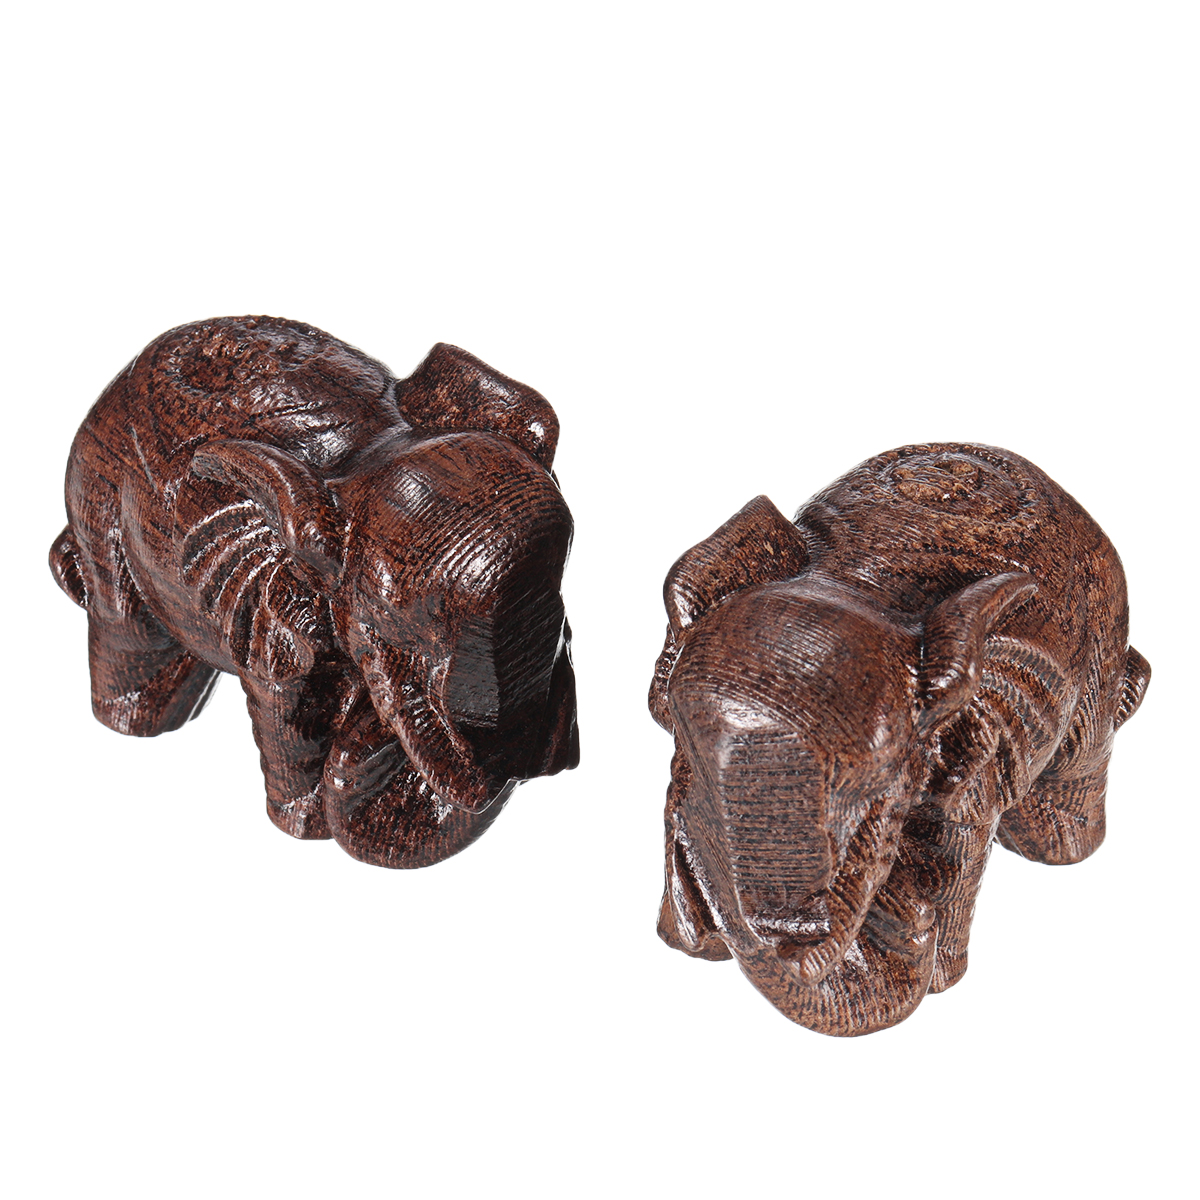 1-Pair-Natural-Agarwood-Elephant-Wood-Carving-Wood-Crafts-Retro-Decoration-Craft-Creative-Gifts-Home-1759099-8